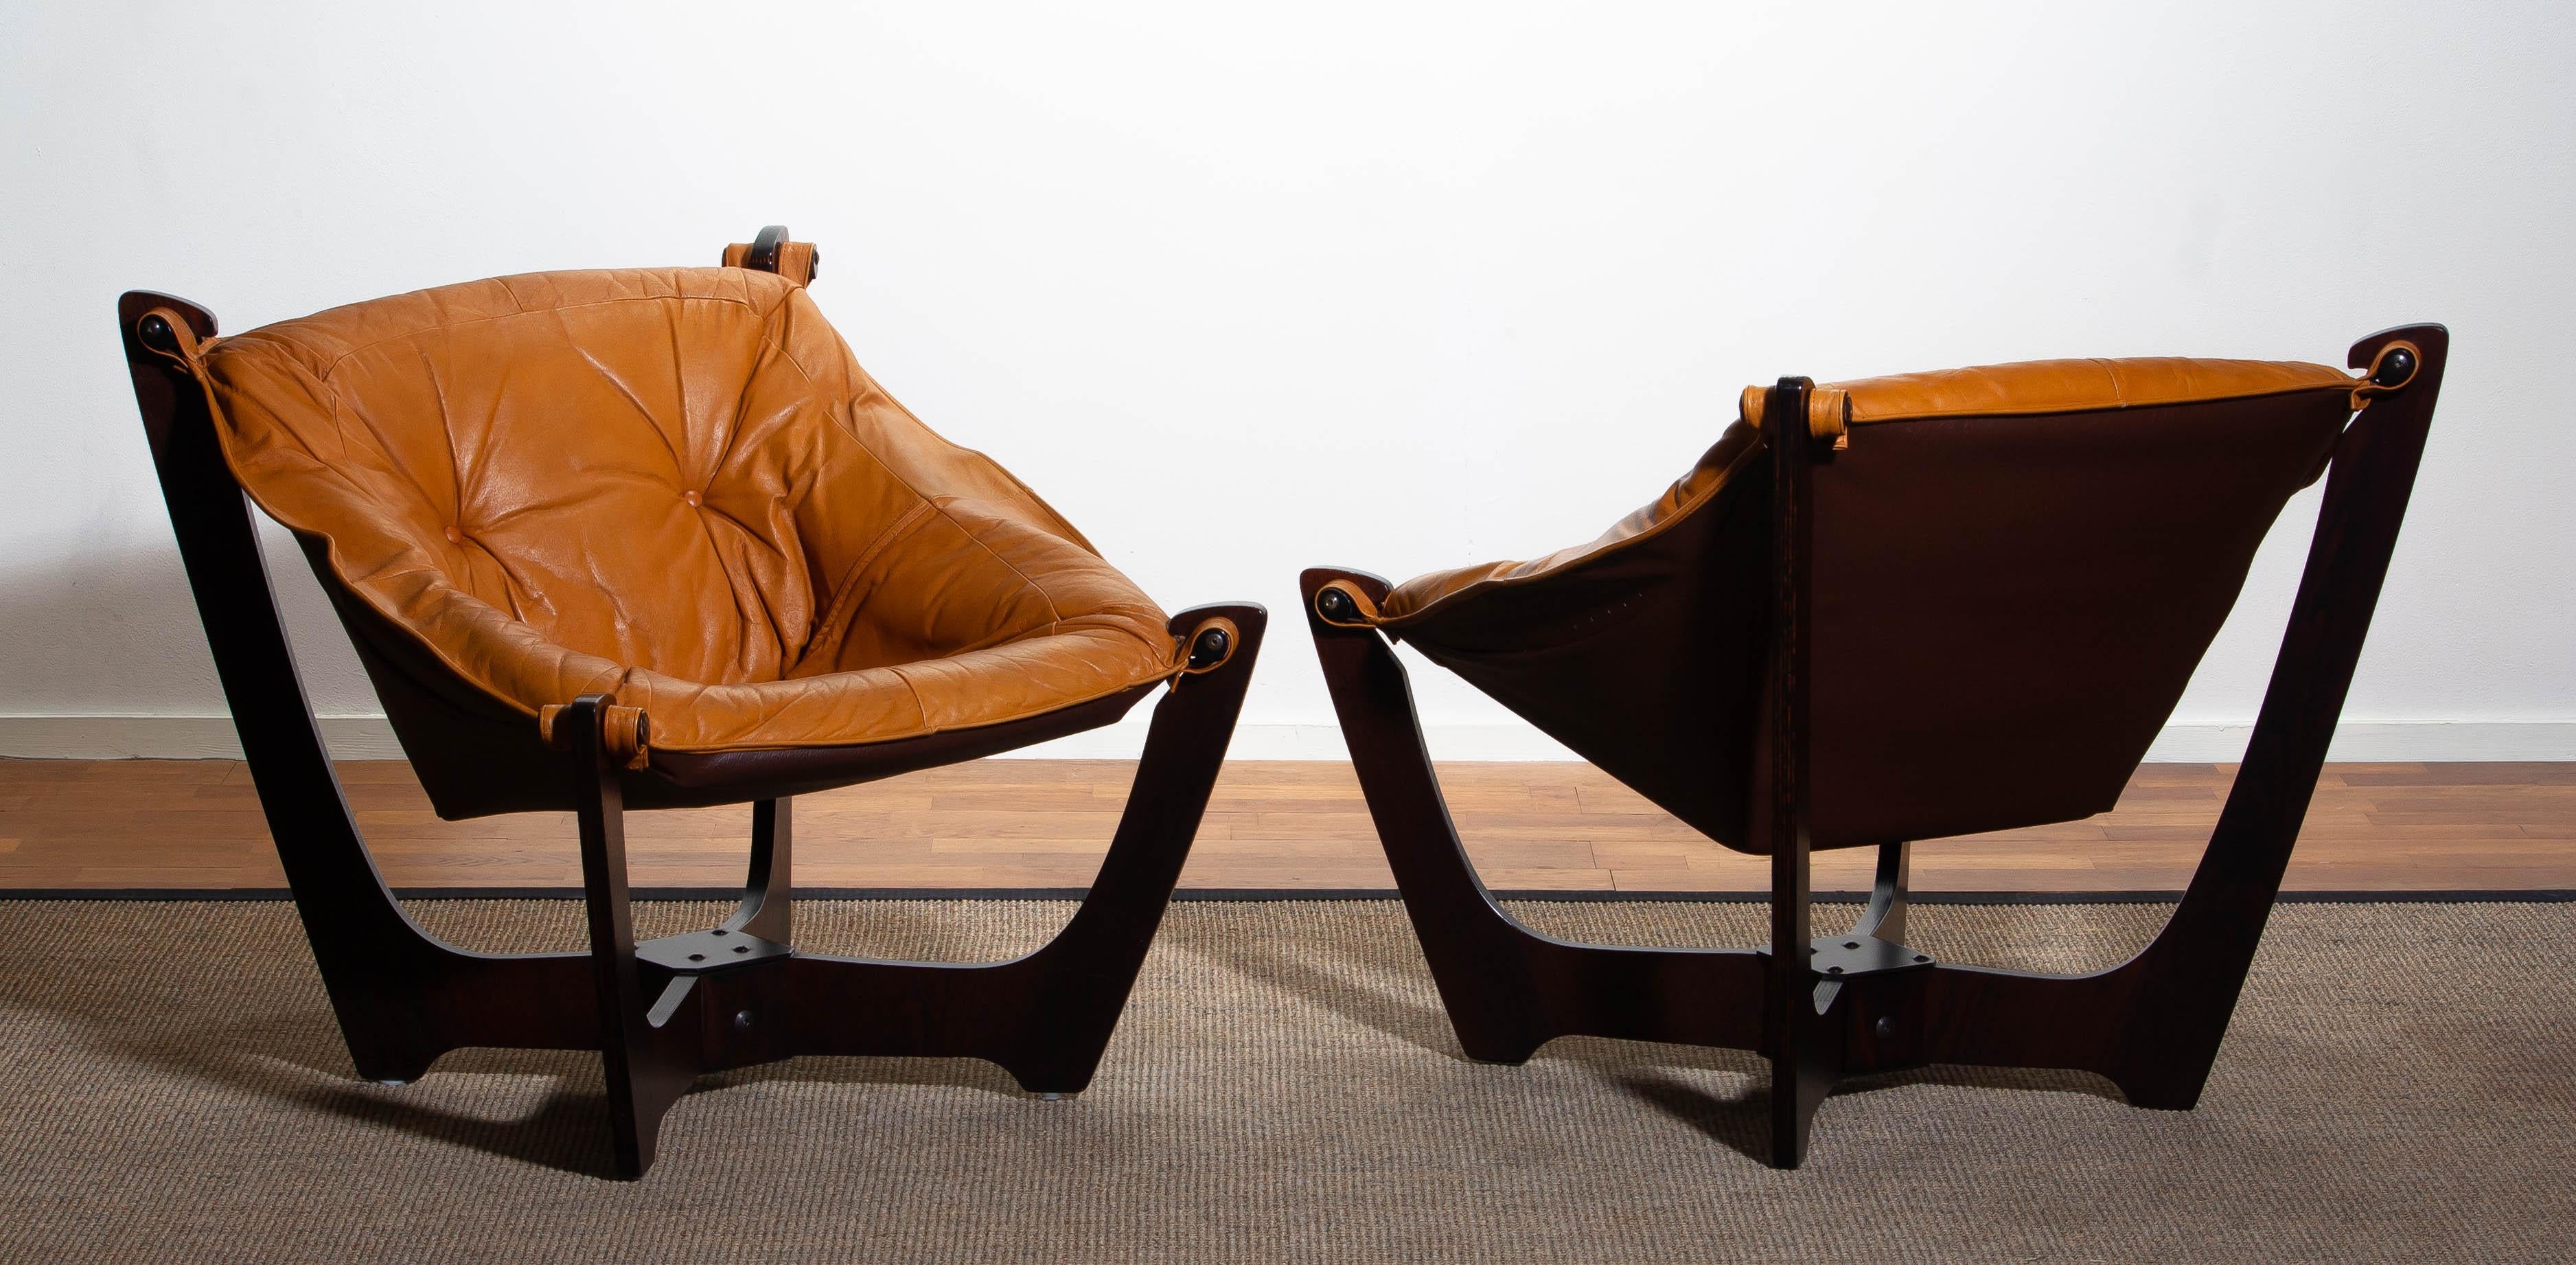 1970 Pair of Leather Lounge Chairs by Odd Knutsen for Hjellegjerde Møbler Norway In Good Condition In Silvolde, Gelderland